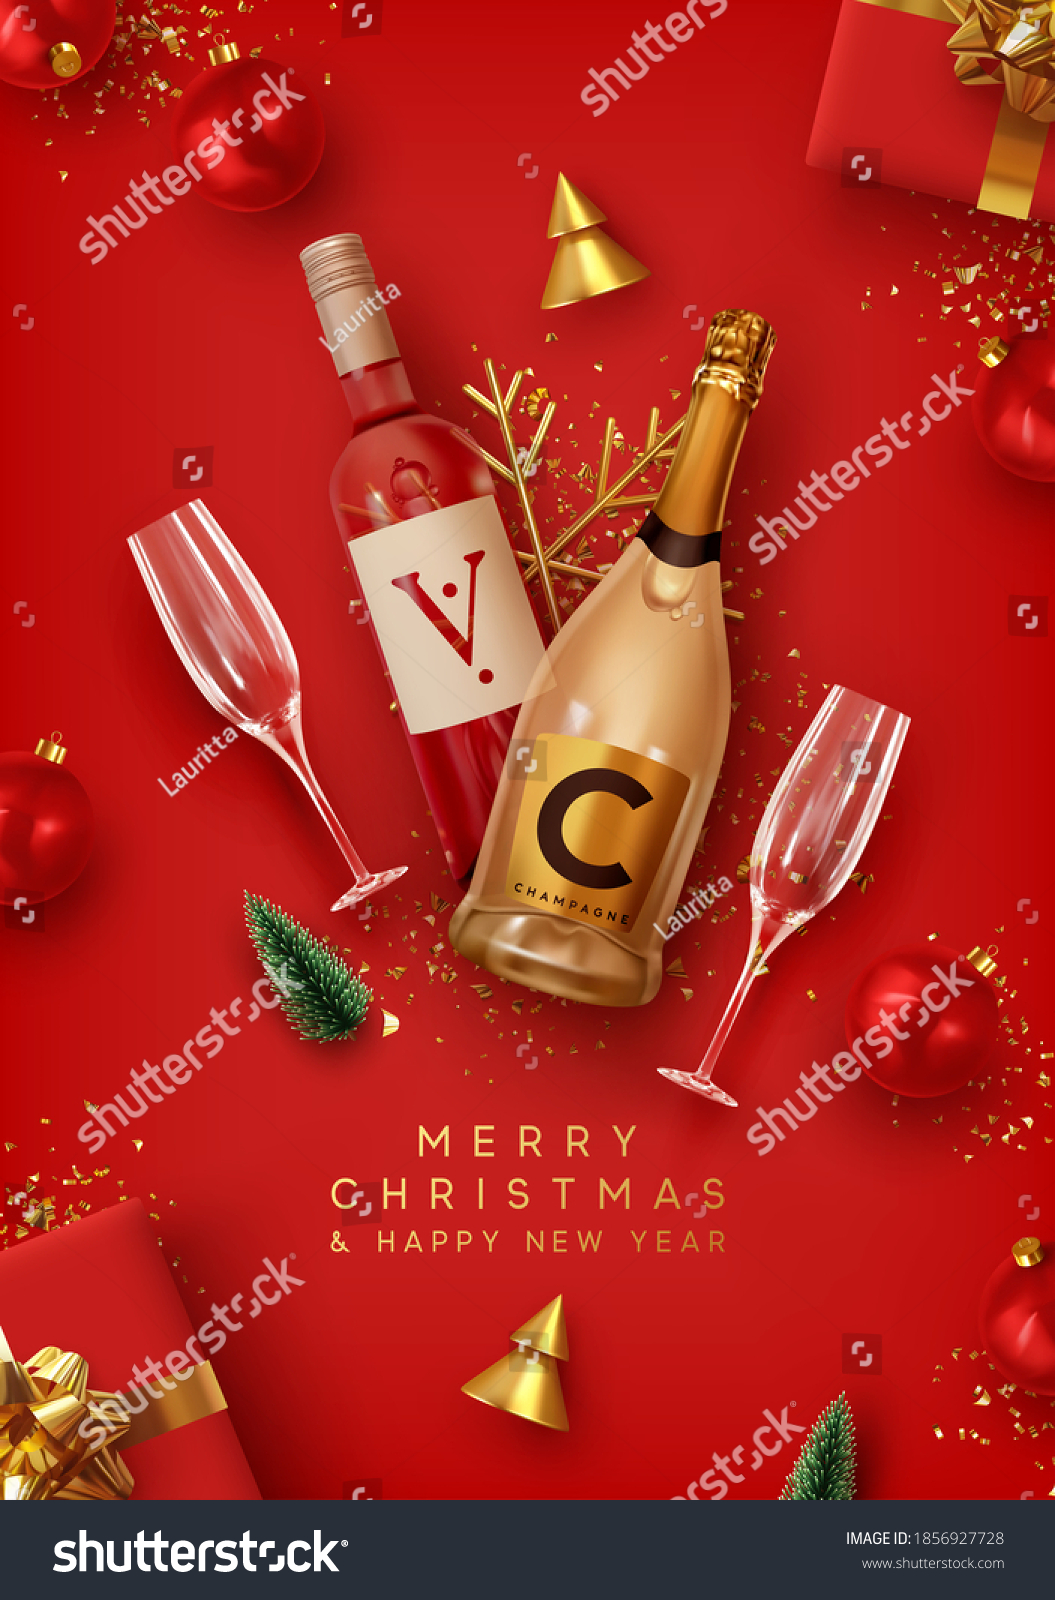 Merry Christmas and Happy New Year. Red Xmas Background design realistic alcohol bottle of champagne and wine, festive decorative objects gift box, balls, Christmas tree and pine tree, golden confetti #1856927728